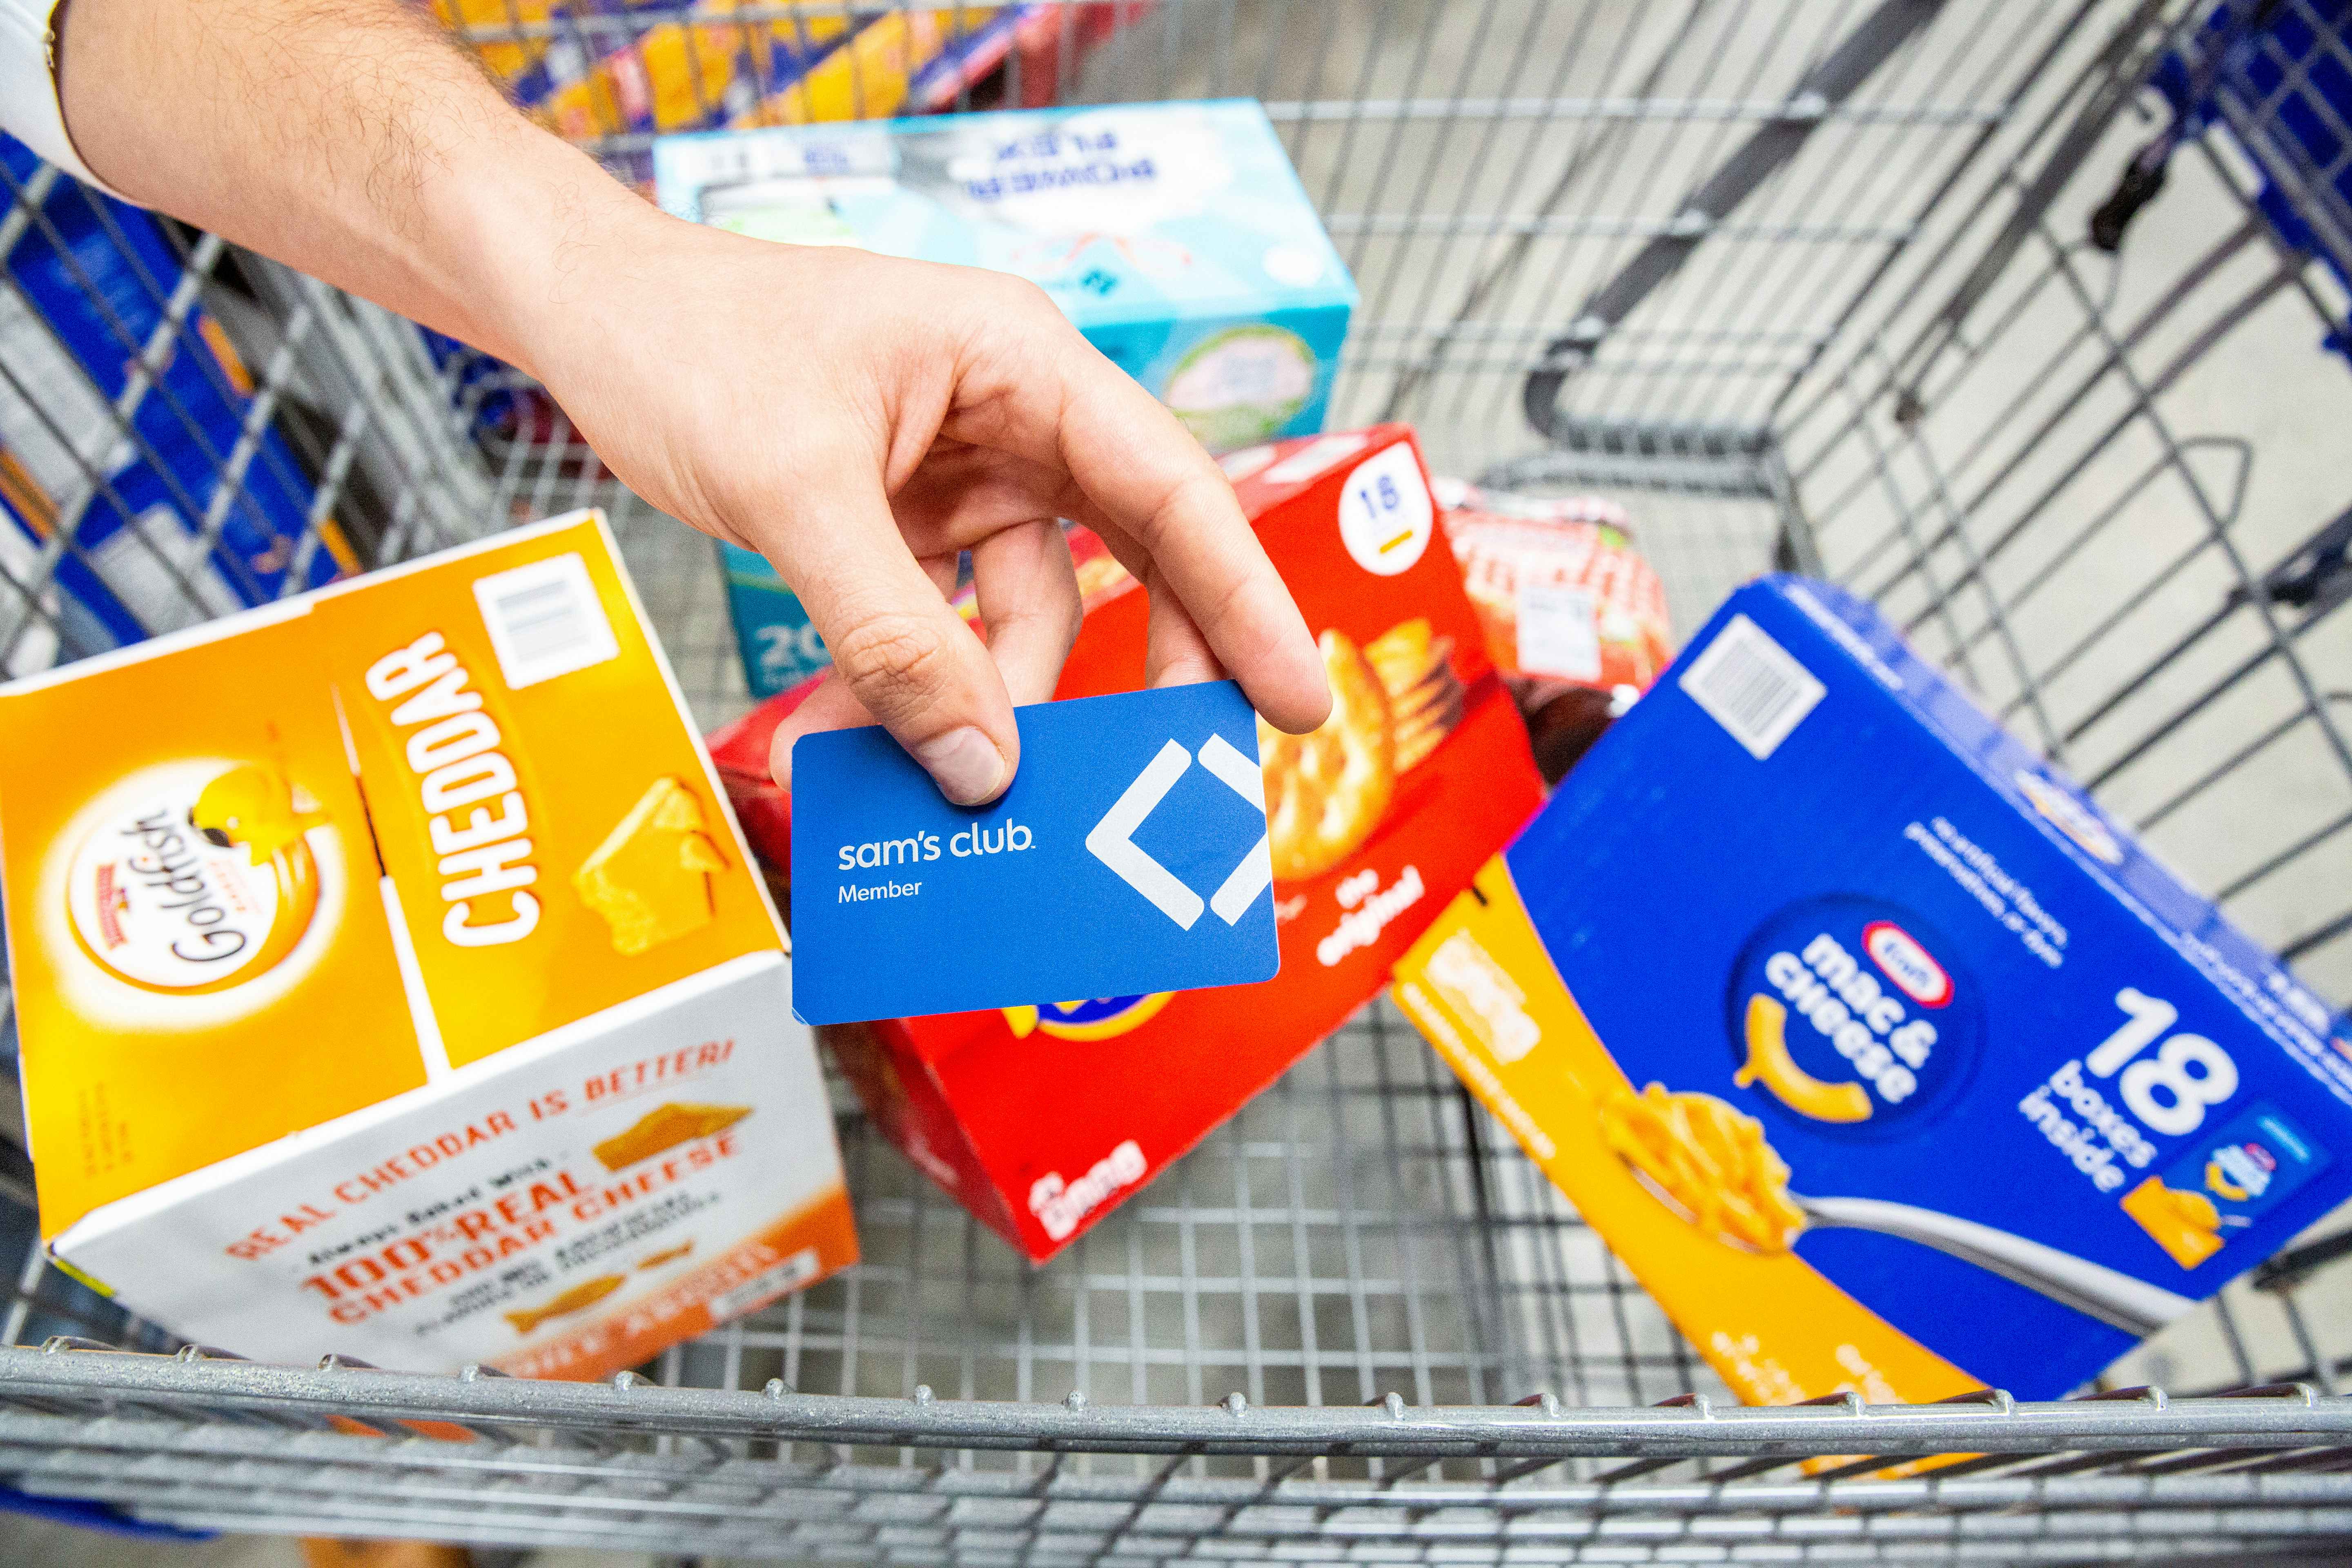 Hand holding a blue Sam's Club membership card above bulk boxes of various snacks like goldfish, kraft mac and cheese, and ritz crackers